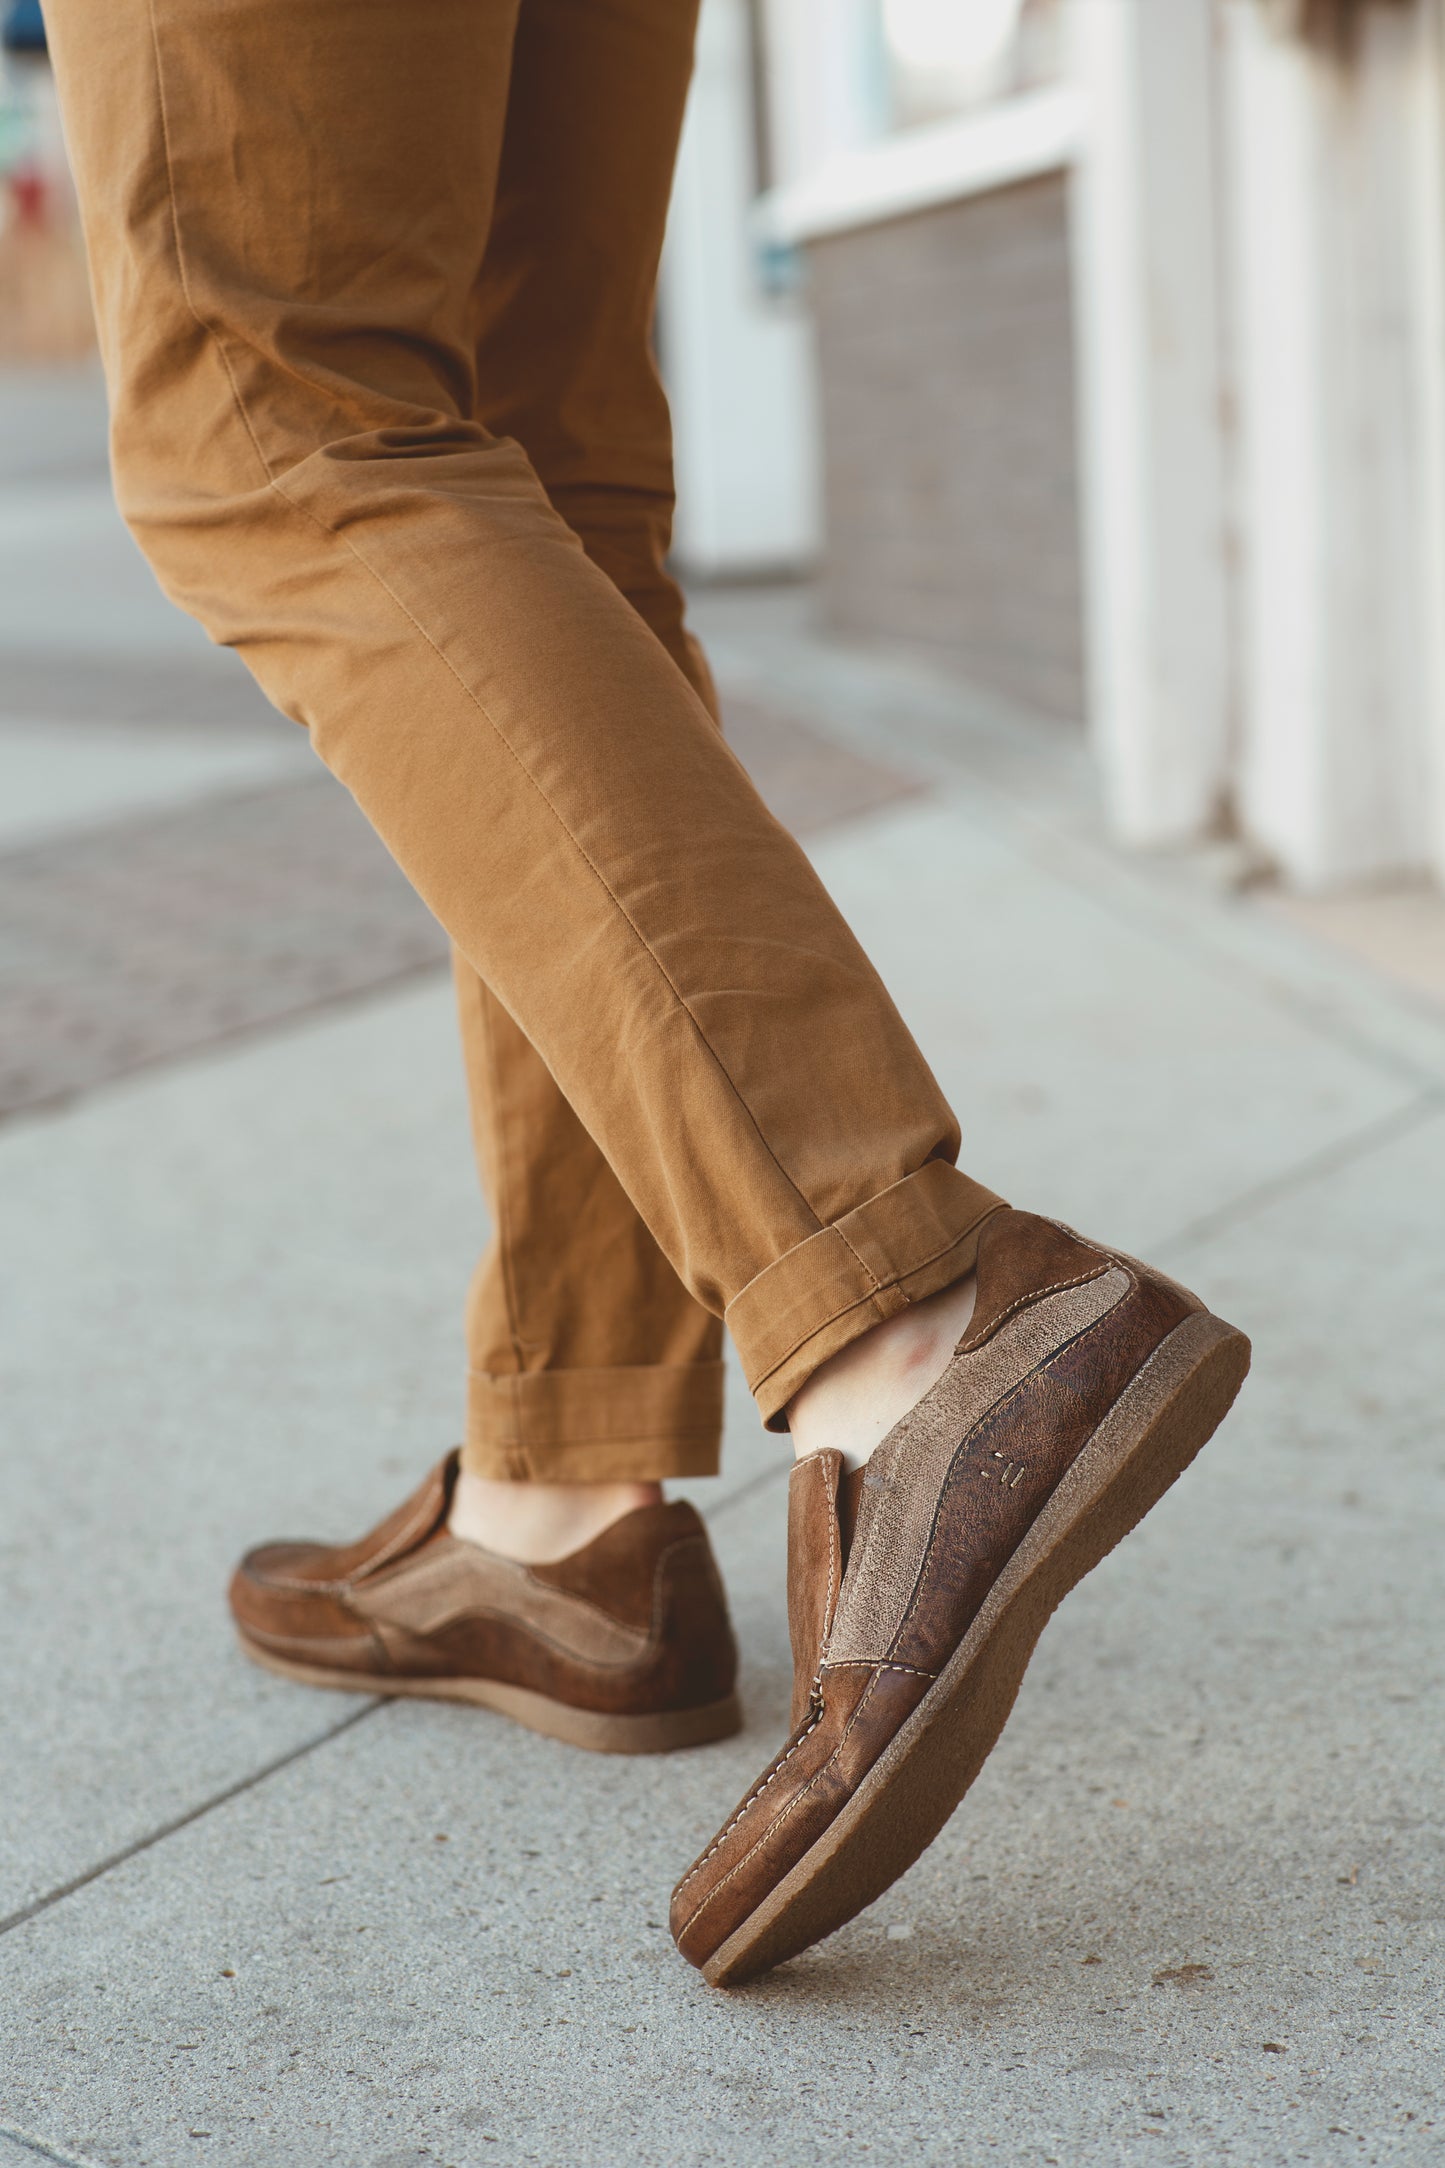 Person wearing Roan Shevon brown leather slip-on shoes with matching trousers on a sidewalk.